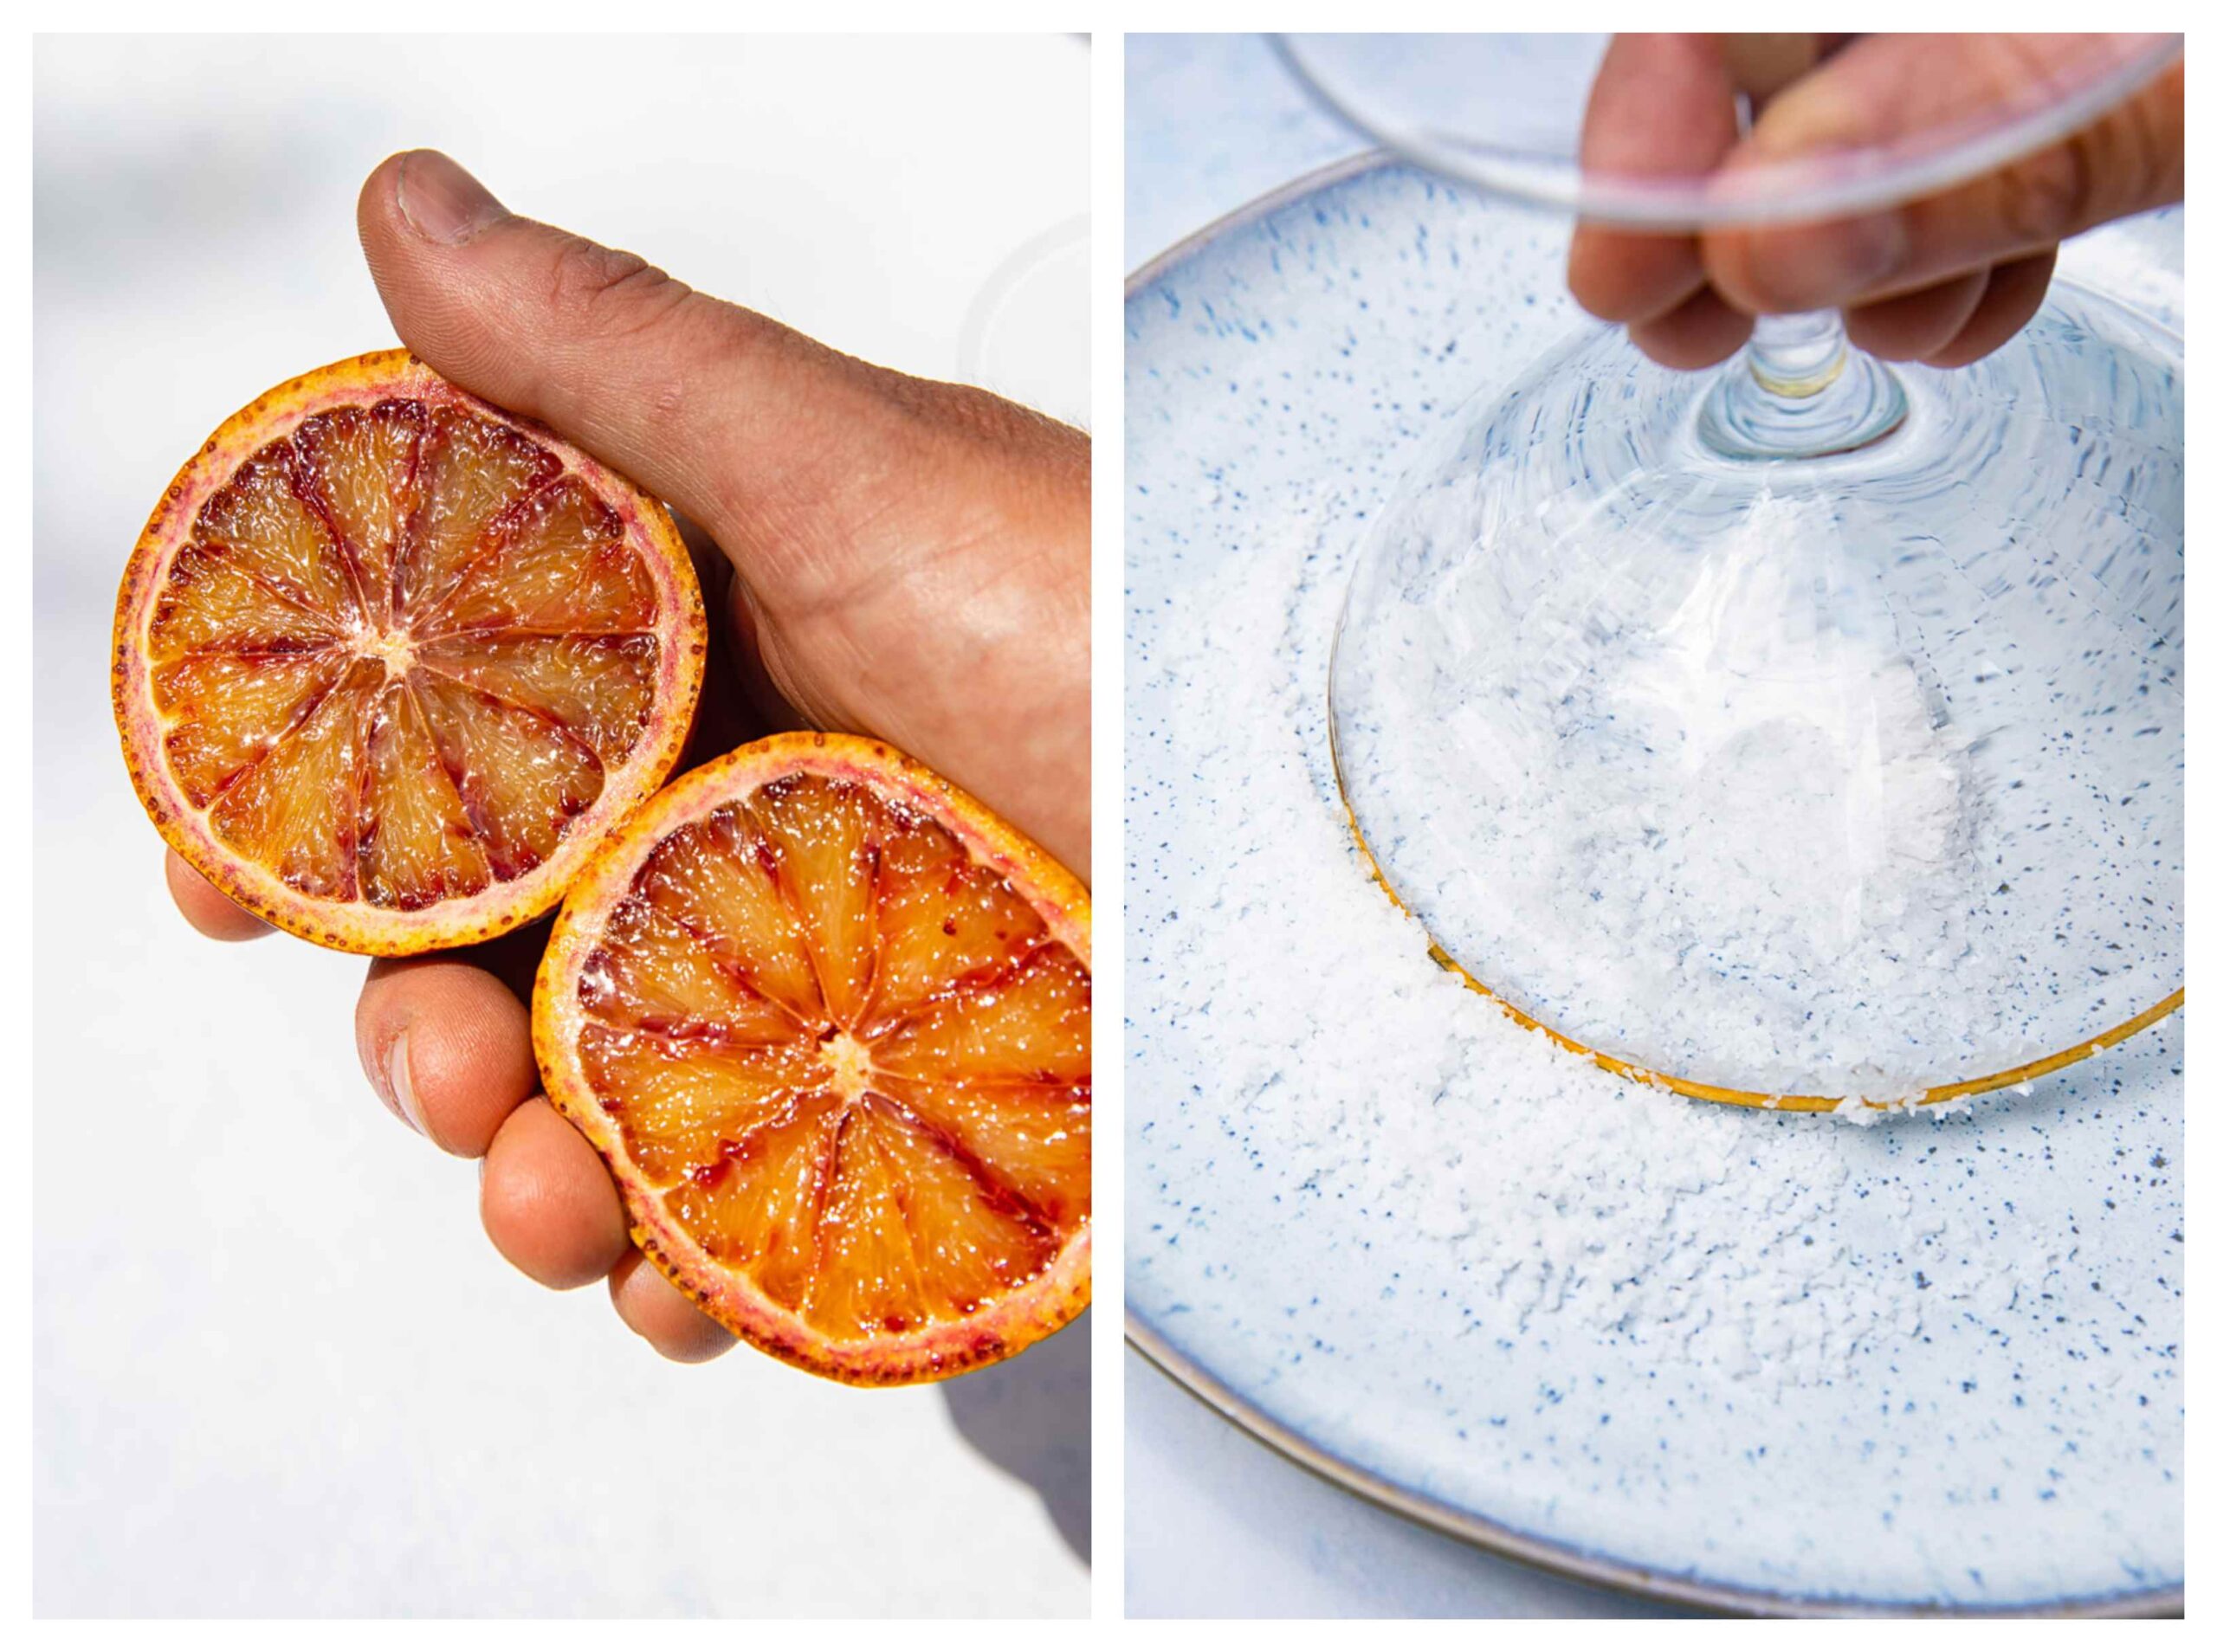 Process shot of blood oranges and glass being prepared for cocktail